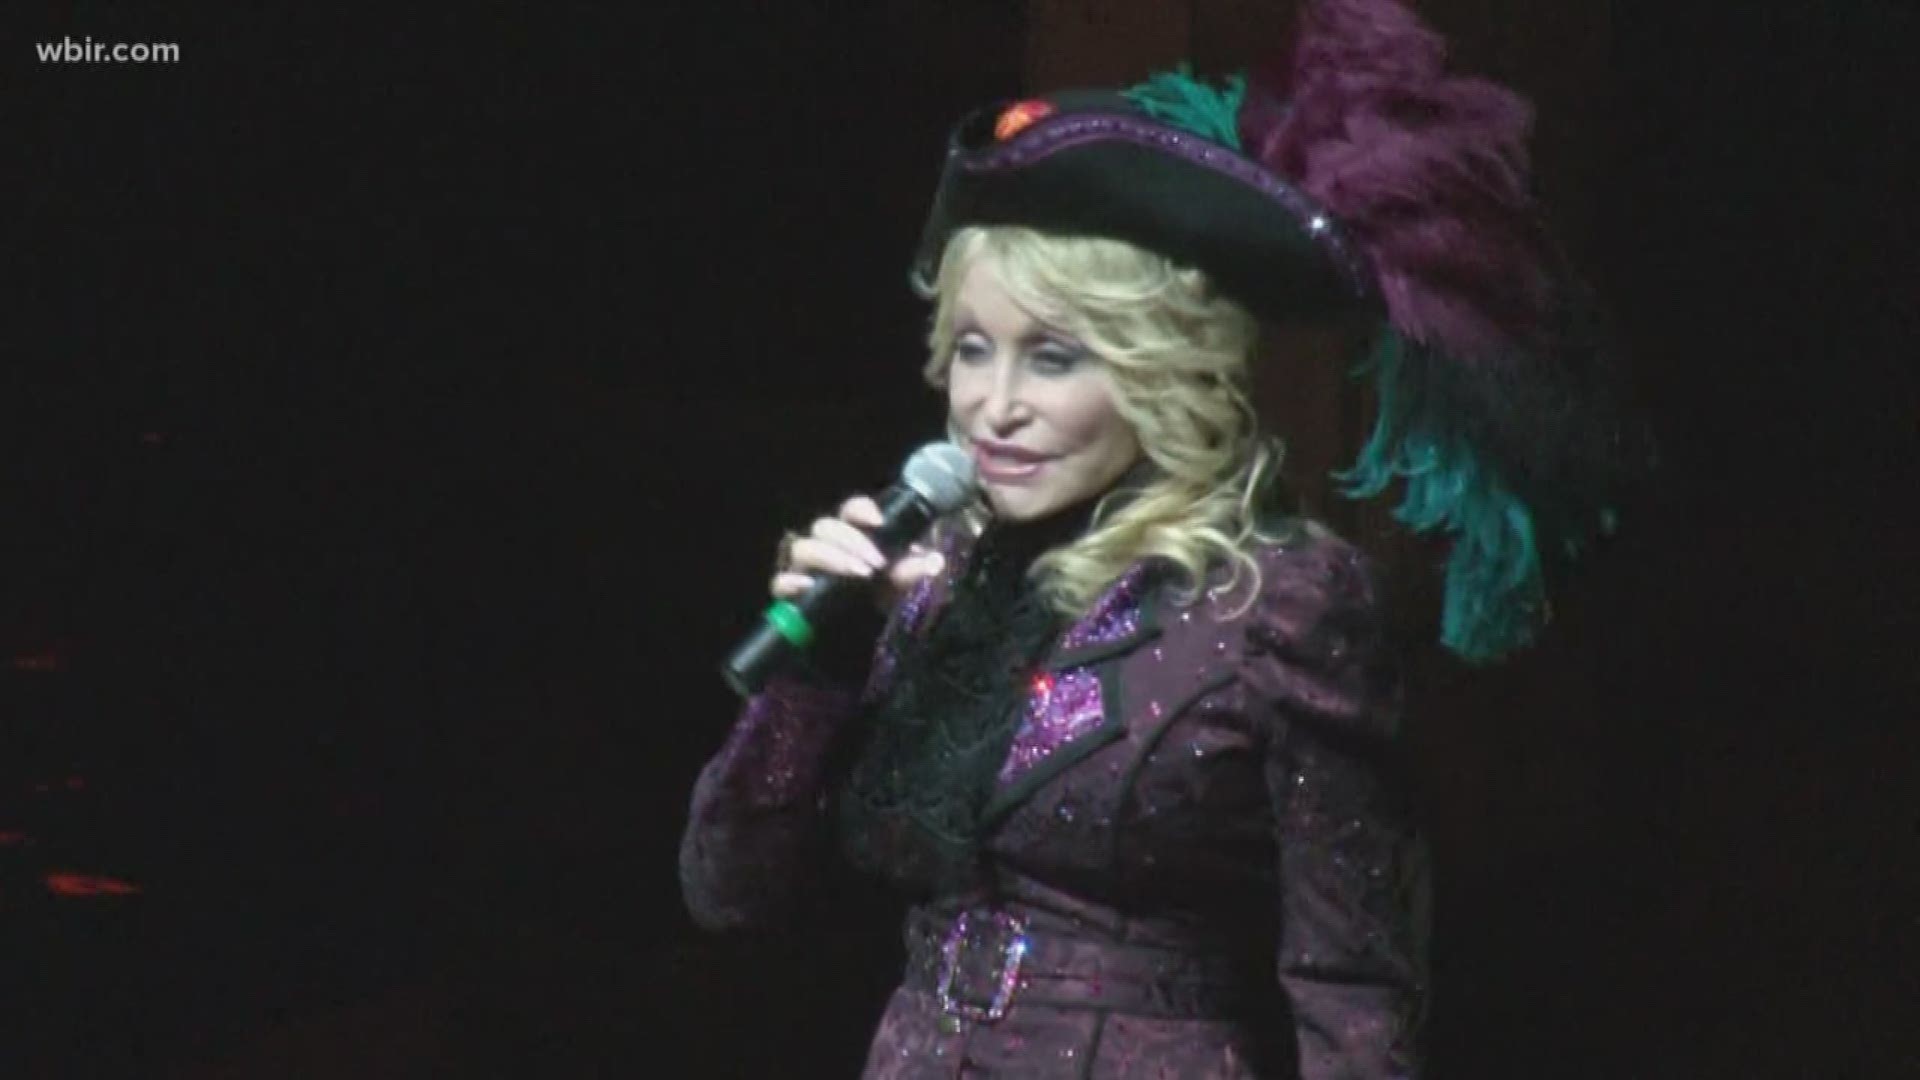 Dolly Parton was in Pigeon Forge to help open Pirate's Voyage, her new dinner theater that tells the story of the Sapphire and Crimson pirates, fighting to rescue the treasures of Buccaneer Bay. June 7, 2019-4pm.